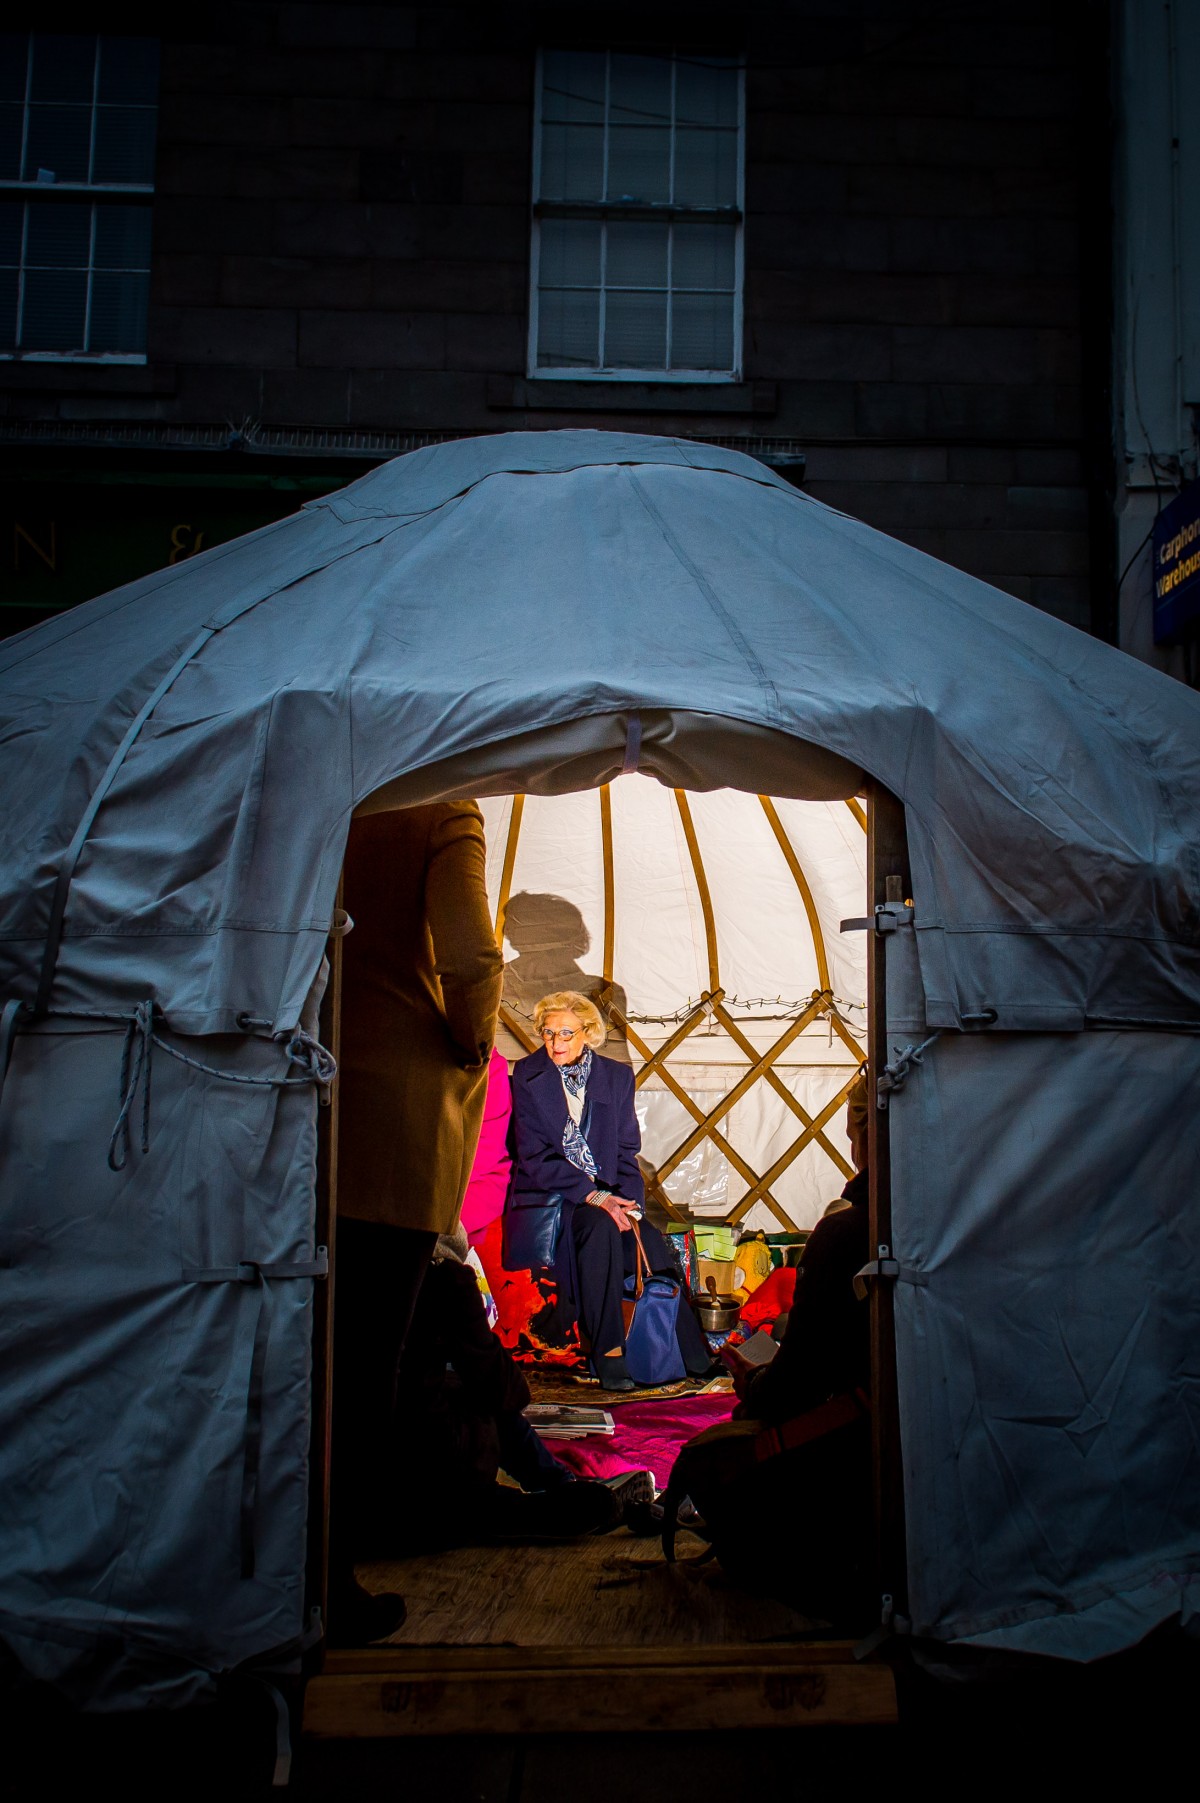 The storytelling yurt was popular with children and adults who came to hear stories, poetry and spoken word.